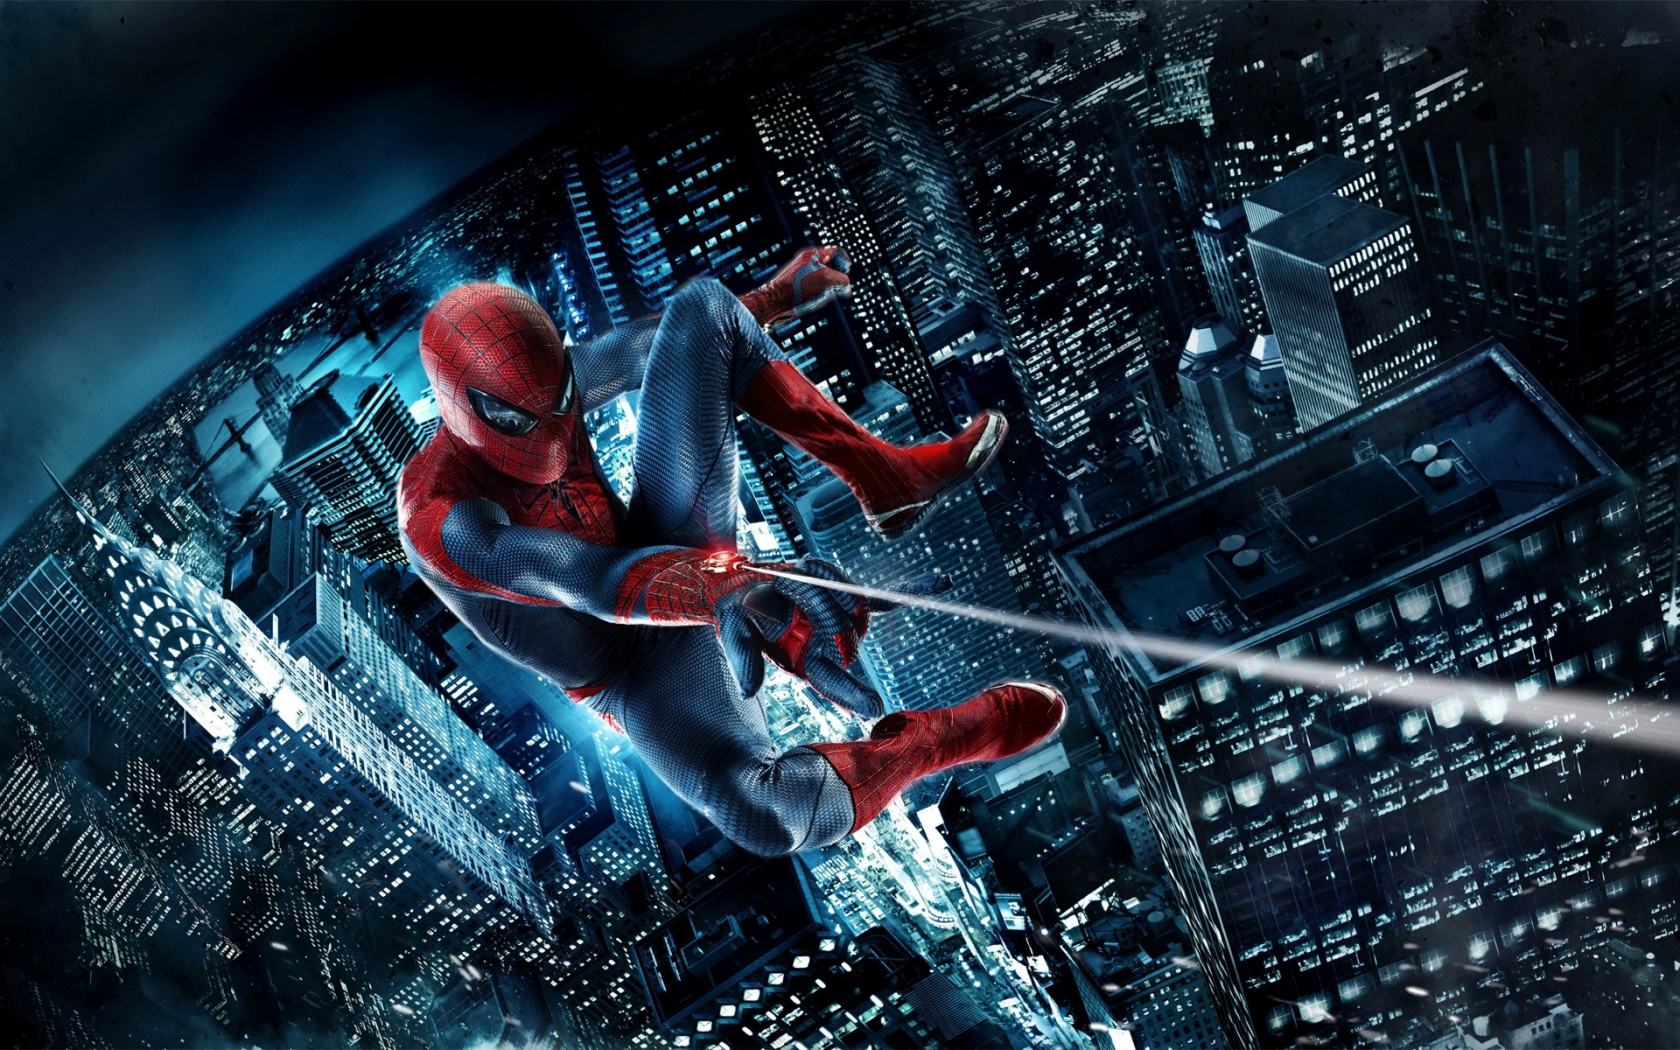 The Amazing SpiderMan 2 for 1680 x 1050 widescreen resolution